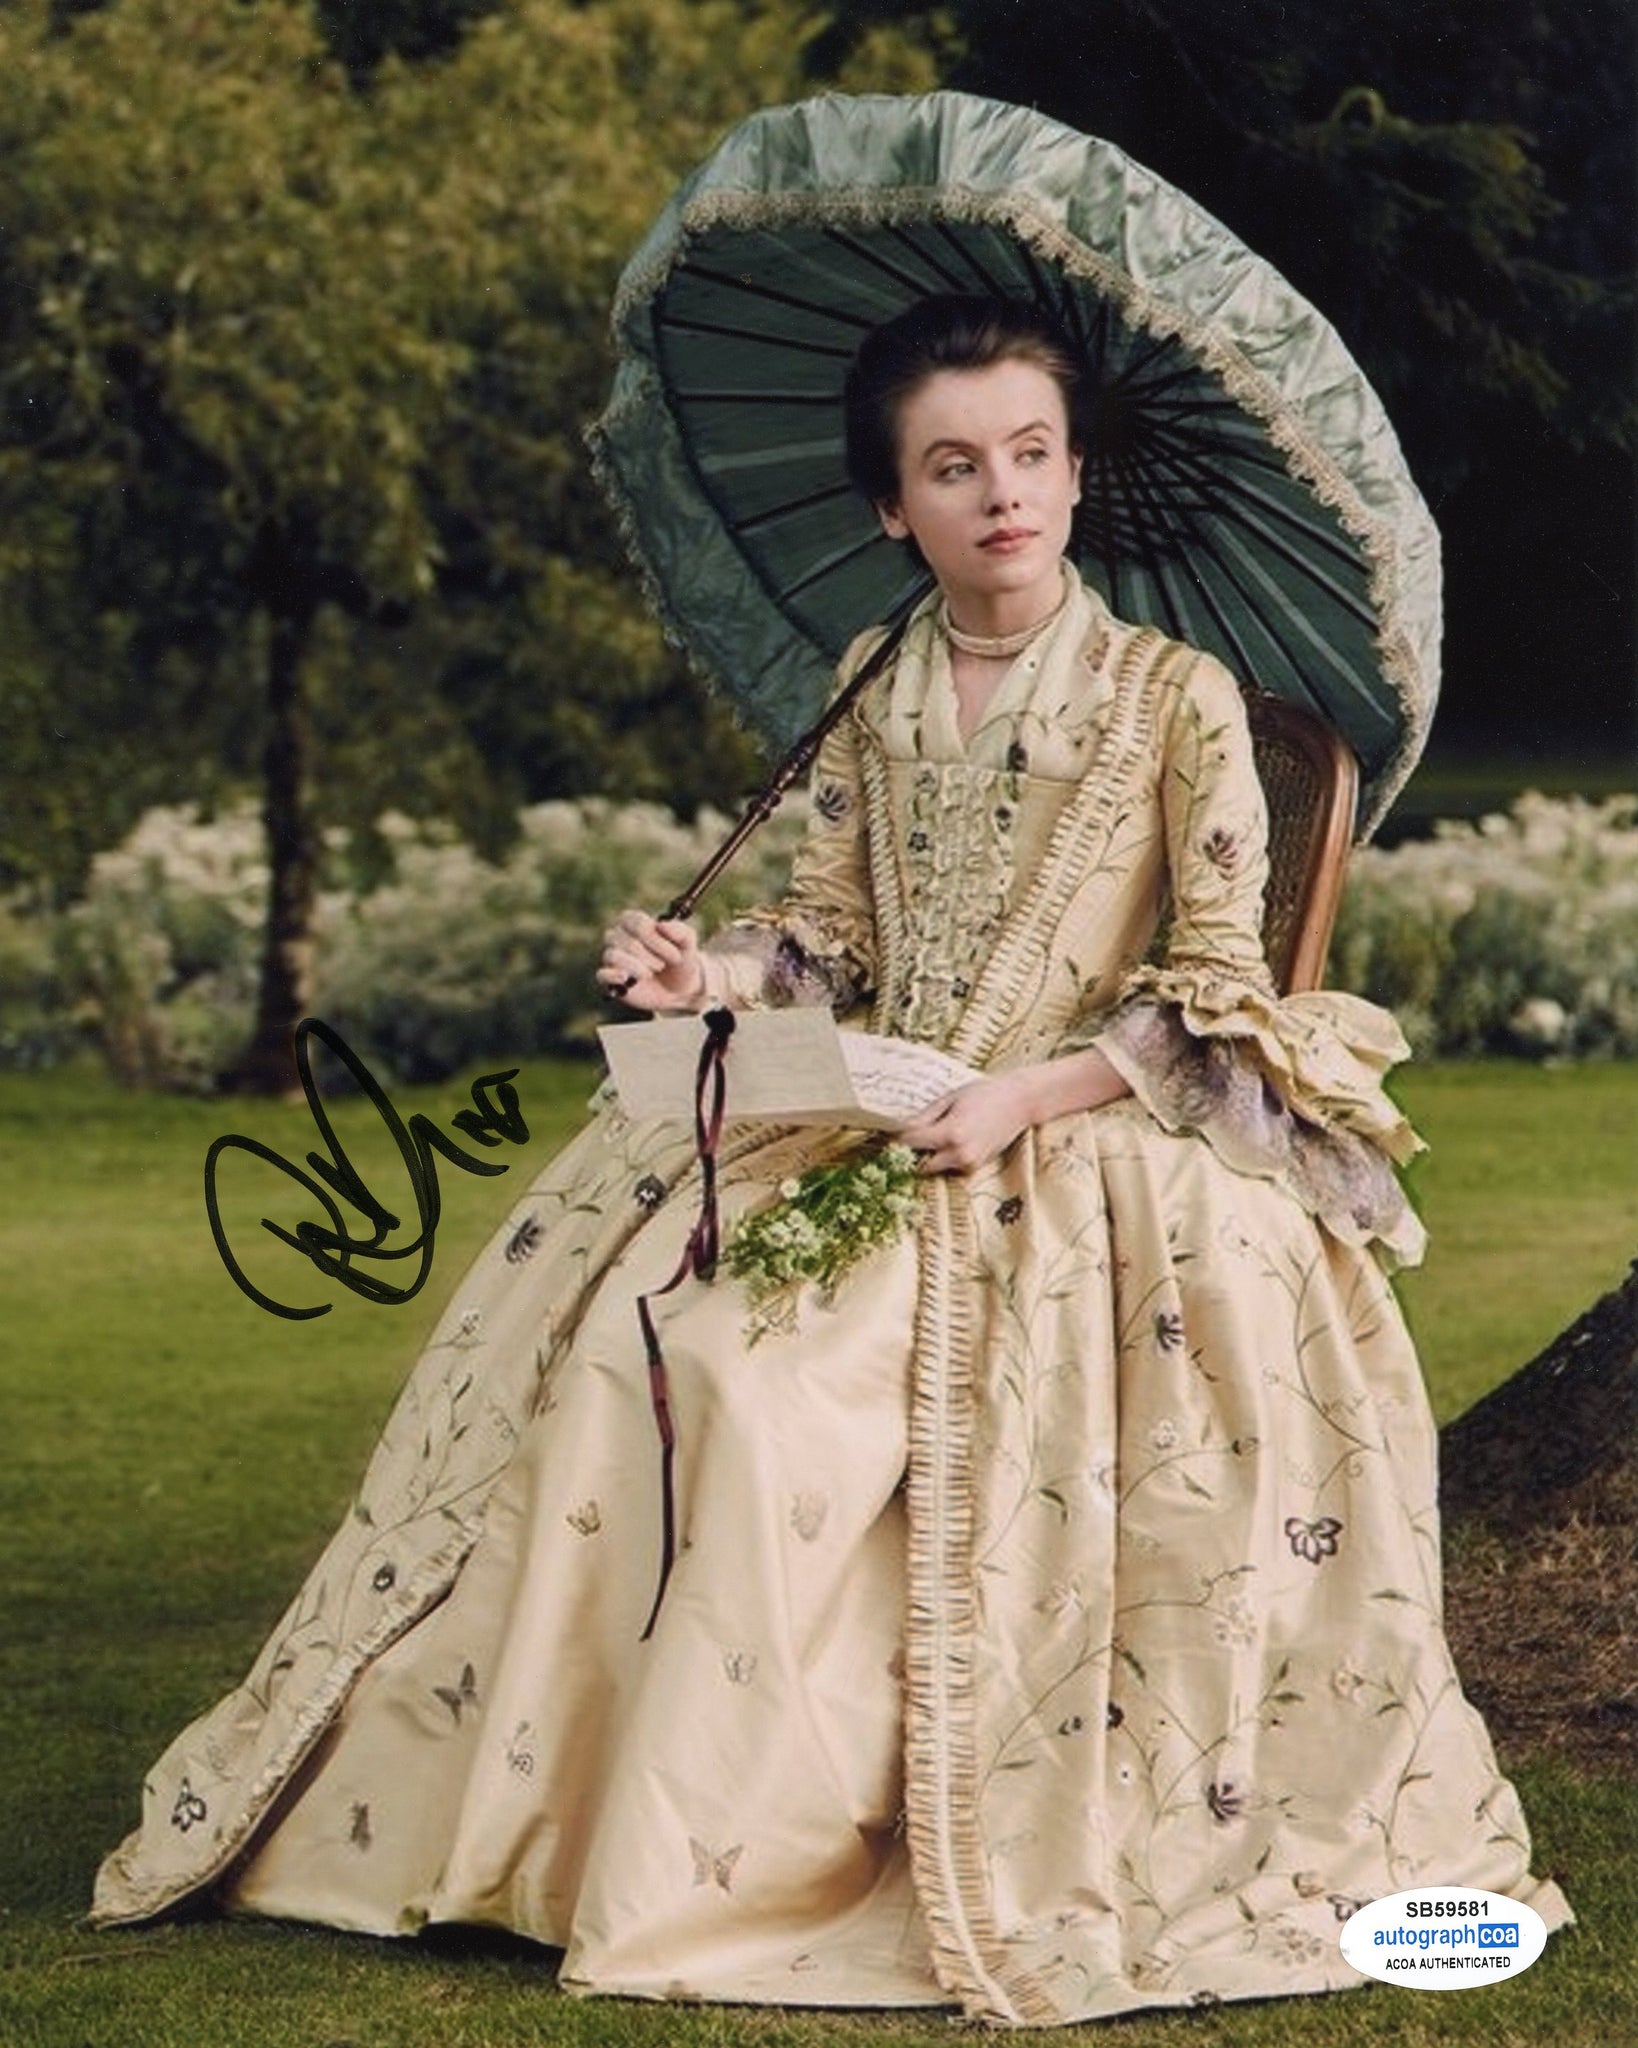 Rosie Day Outlander Signed Autograph 8x10 Photo ACOA